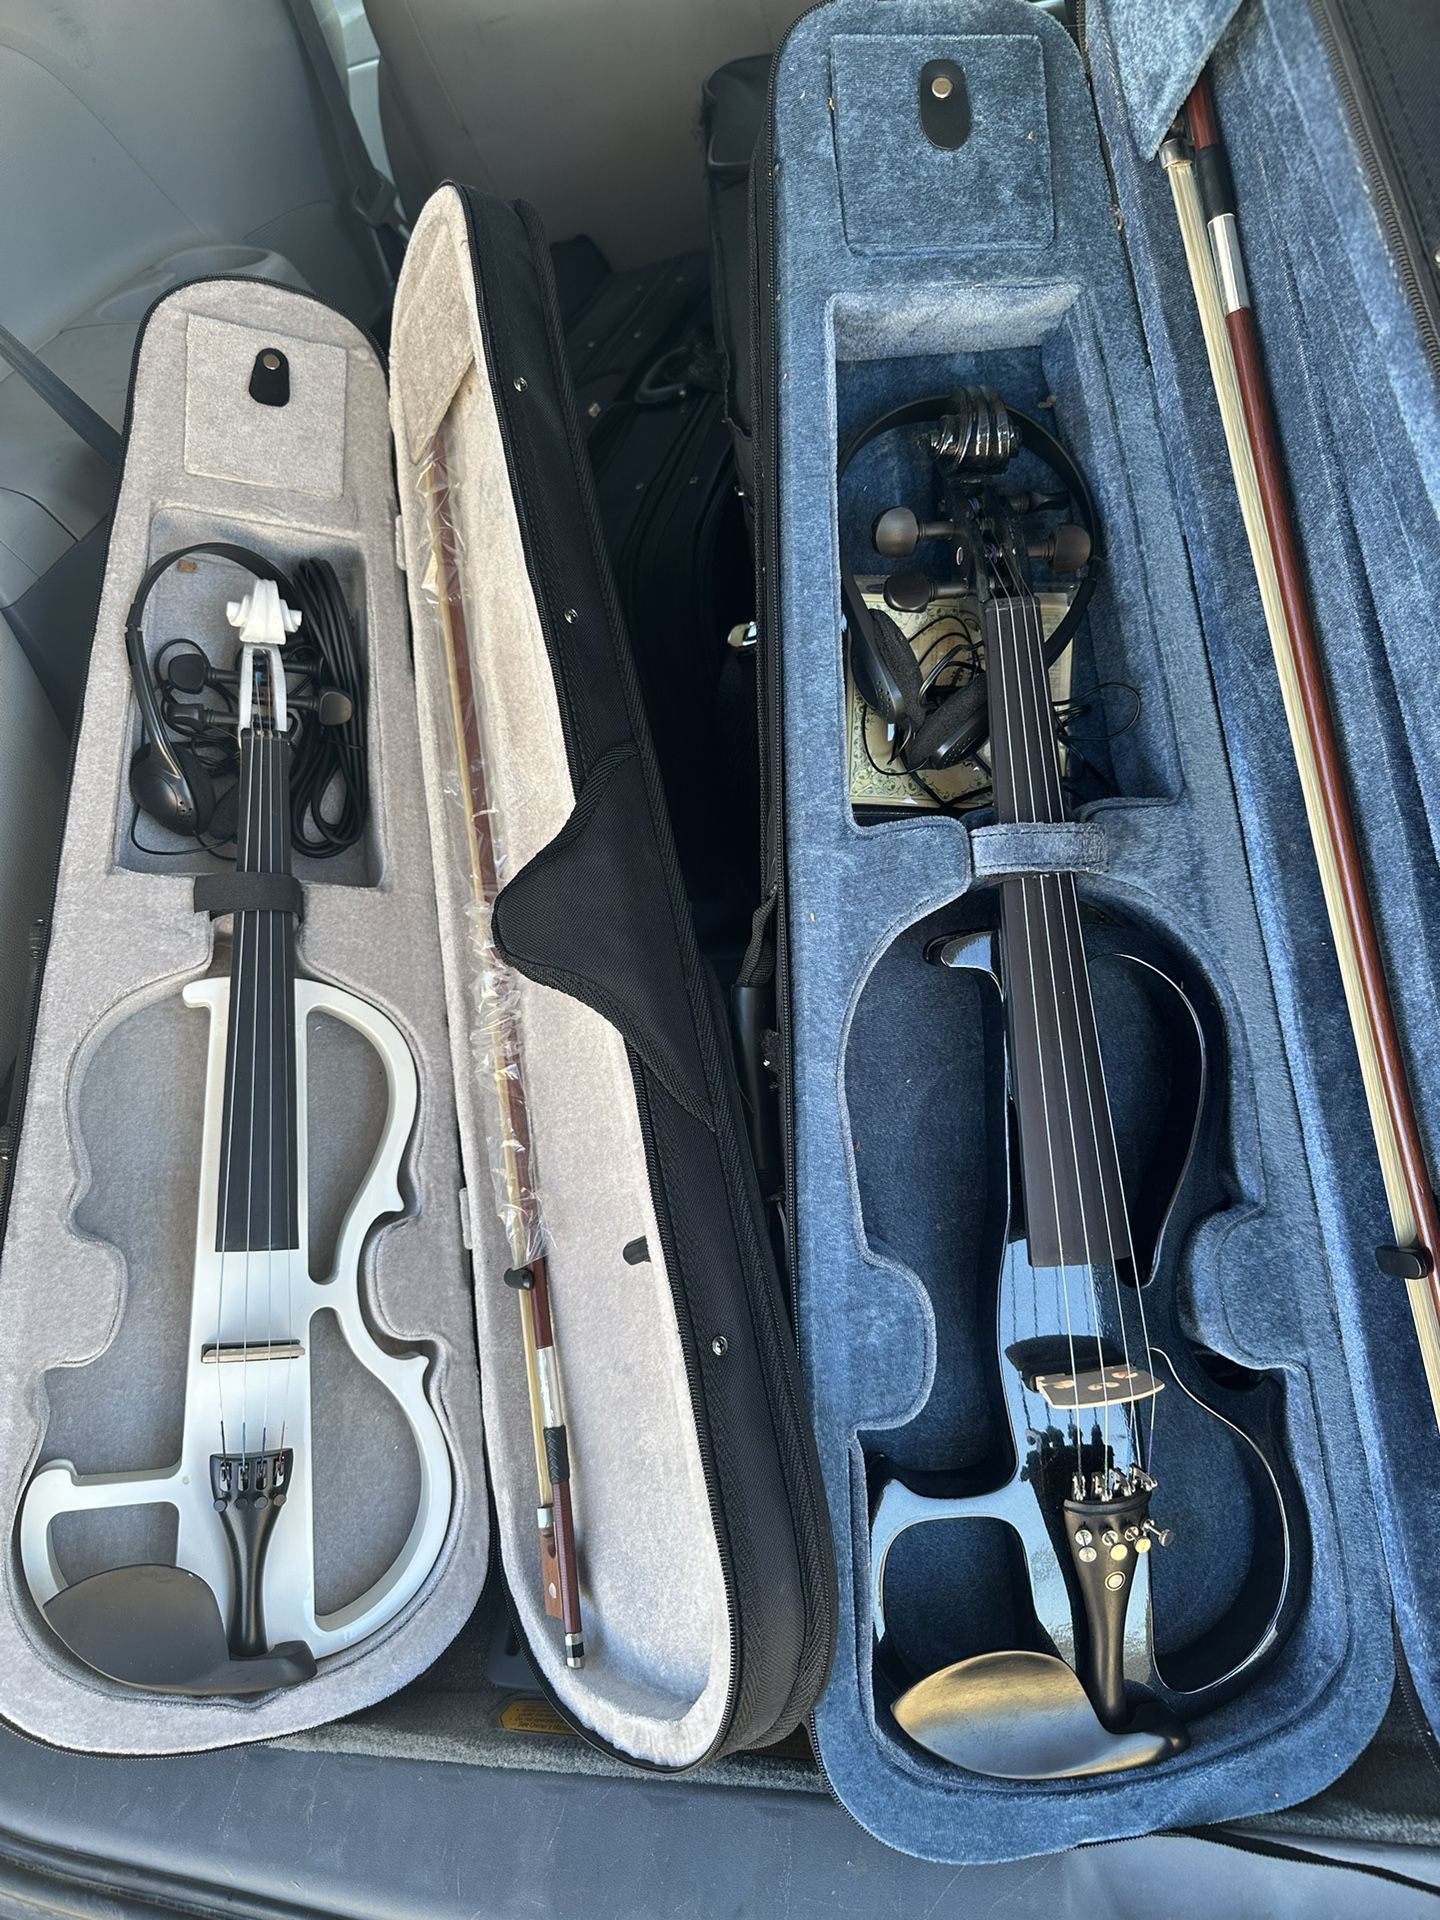 White and Black Electric Violins $160 Each Firm